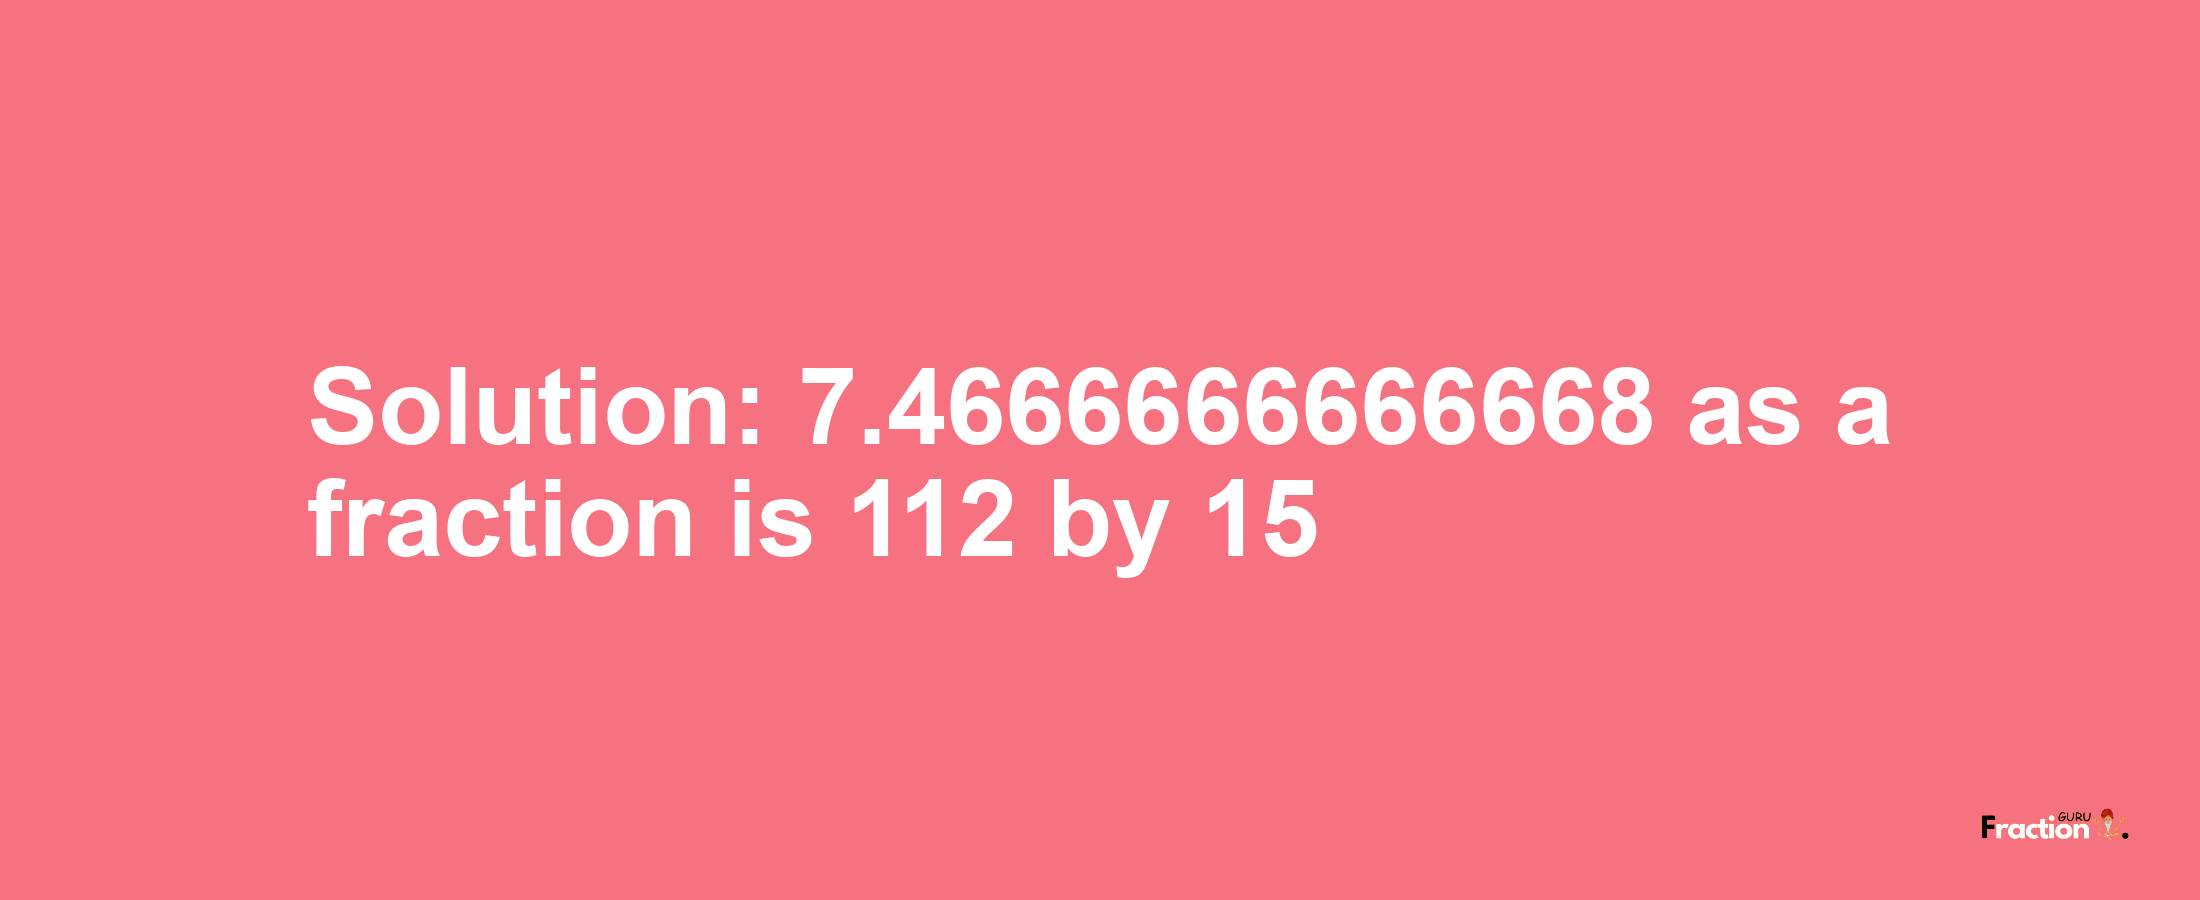 Solution:7.4666666666668 as a fraction is 112/15